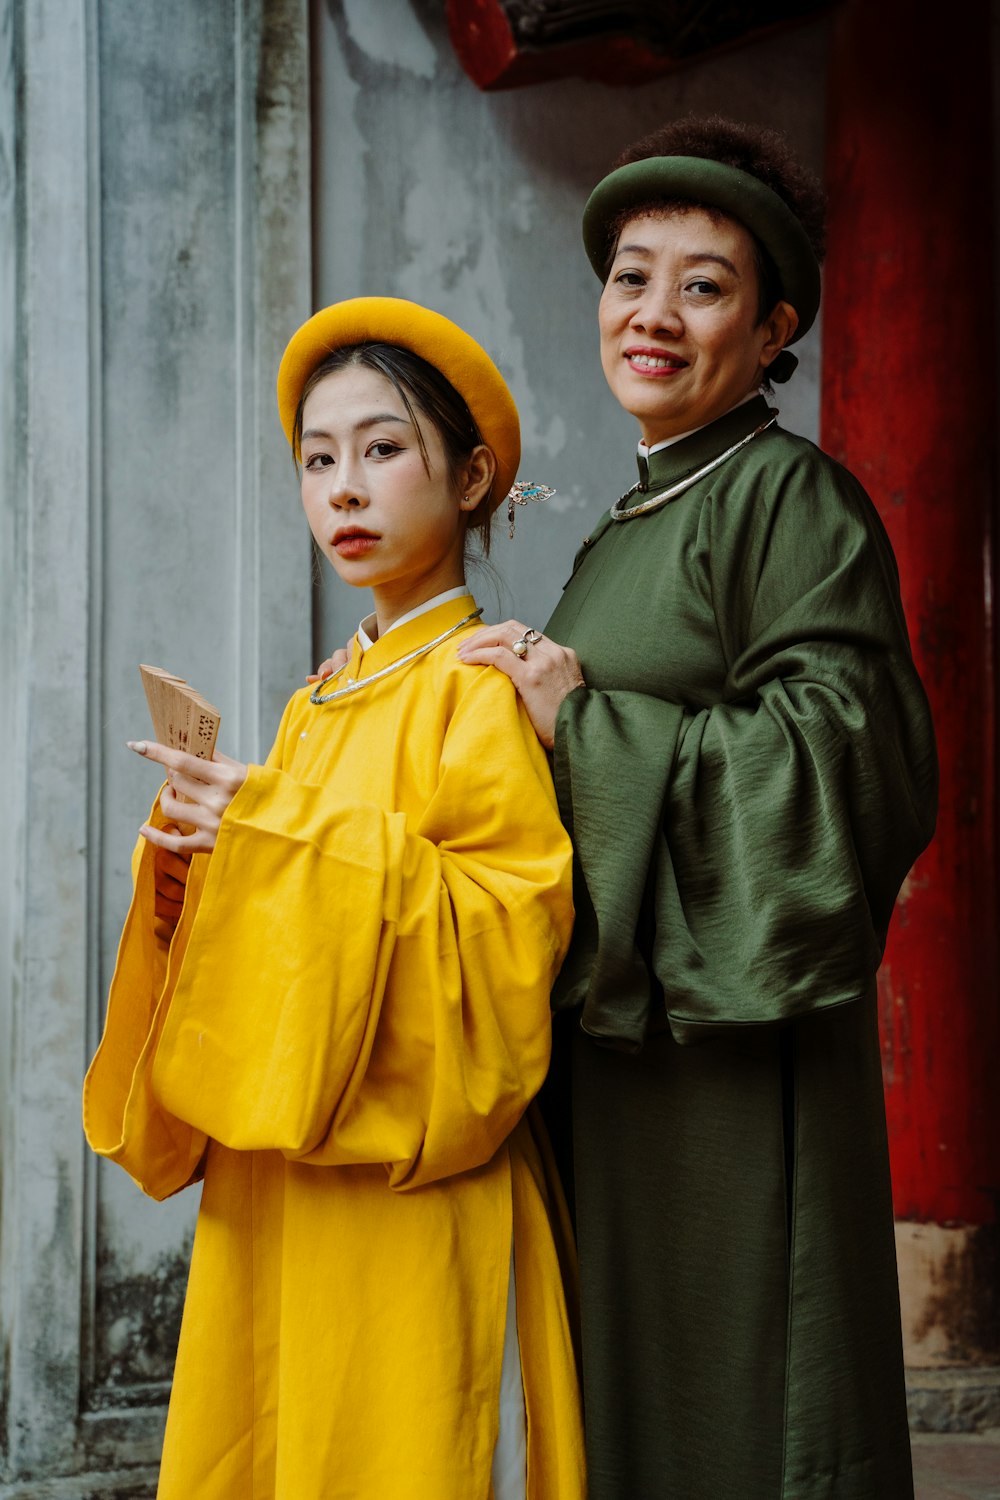 a woman in a yellow dress and a woman in a green dress